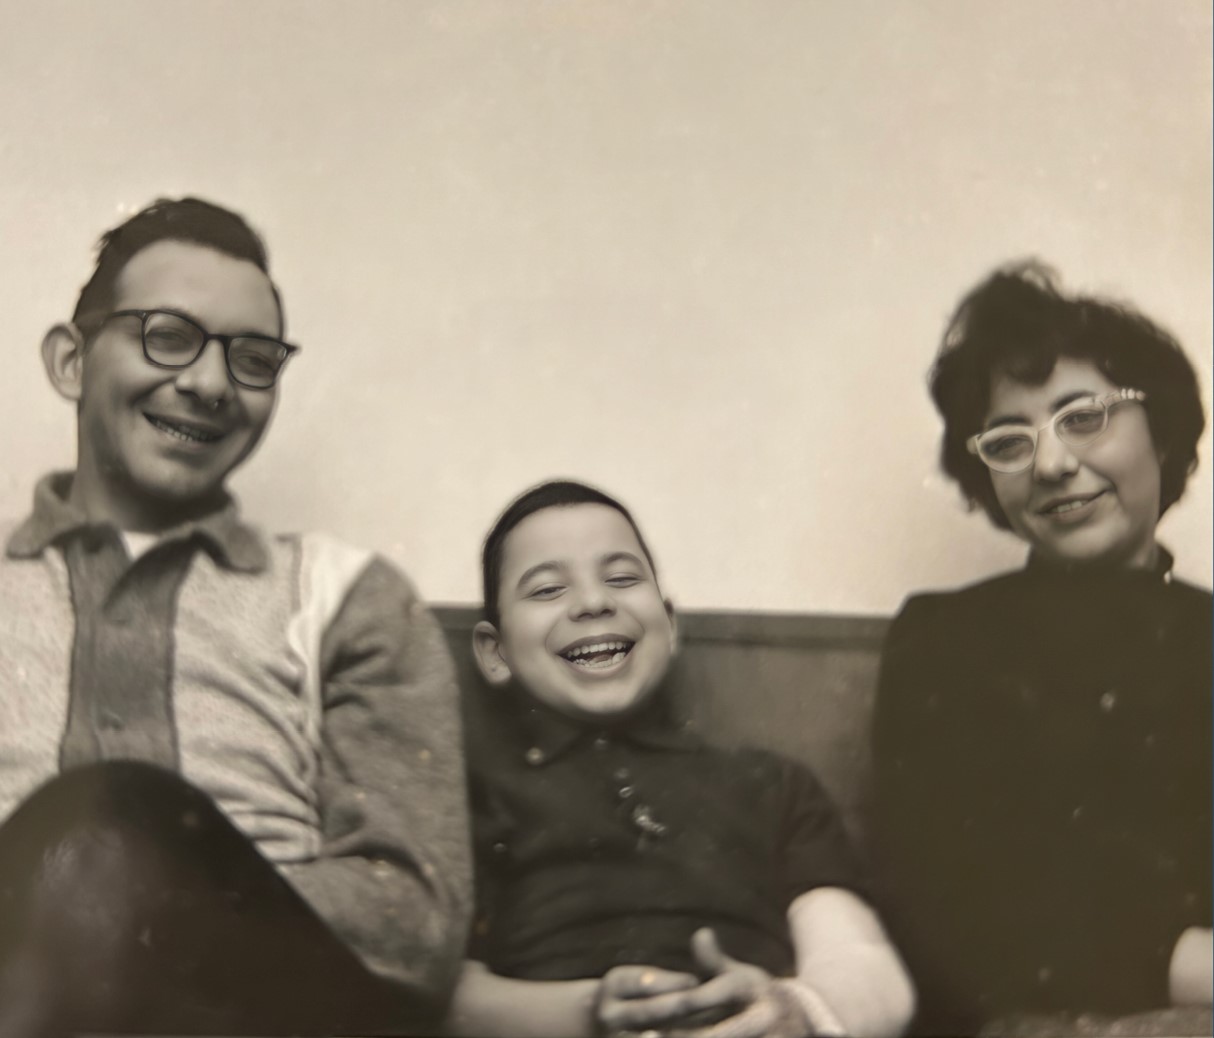 A sepia photo of Dr. Winer as a child with his parents.